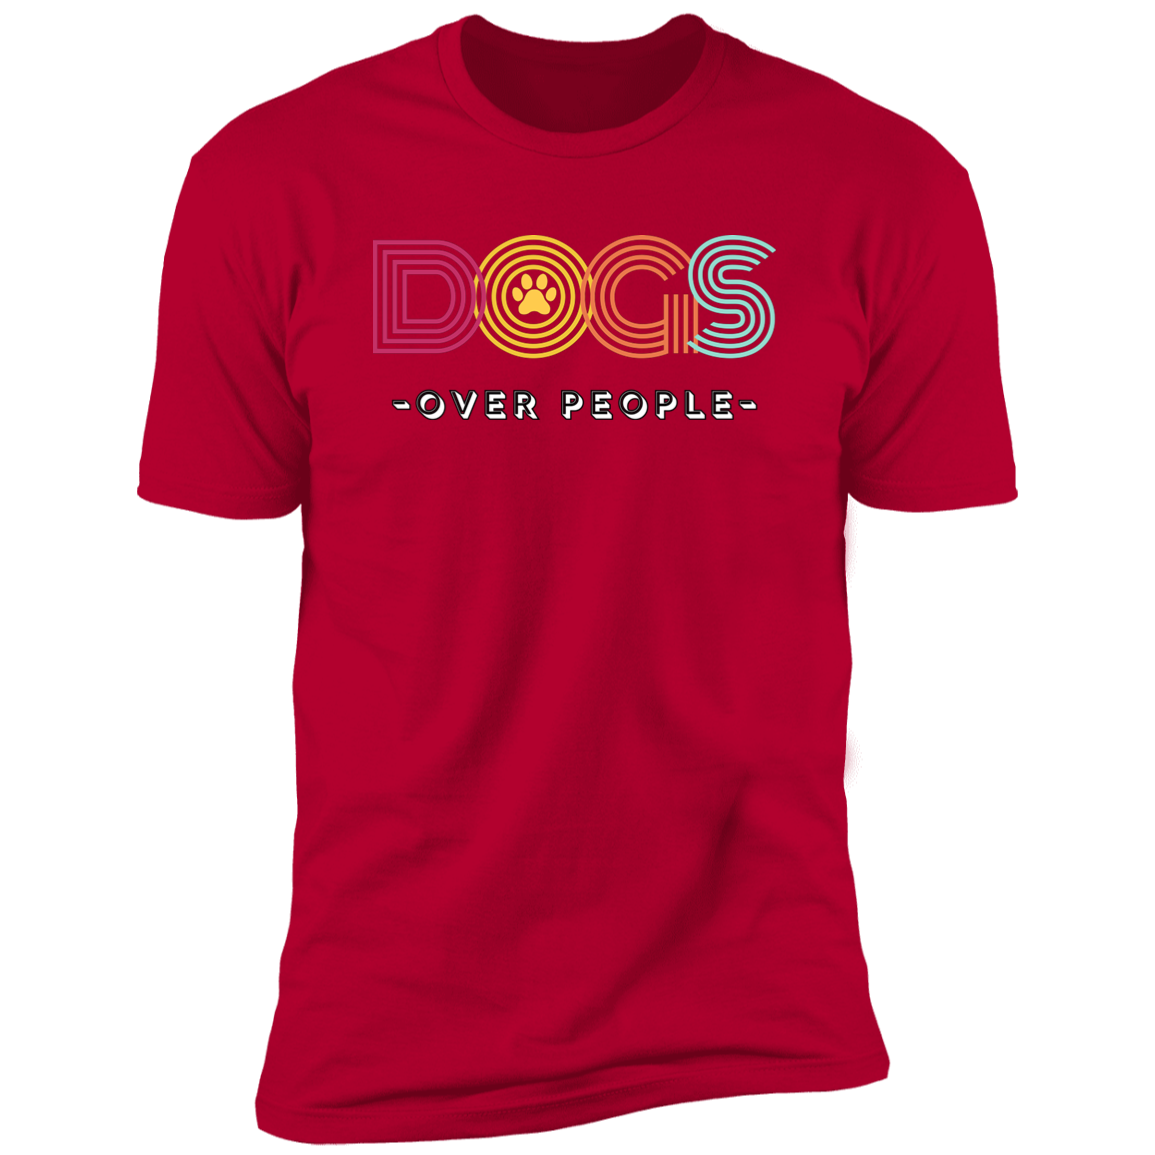 Dogs Over People t-shirt, funny dog shirt for humans, in red